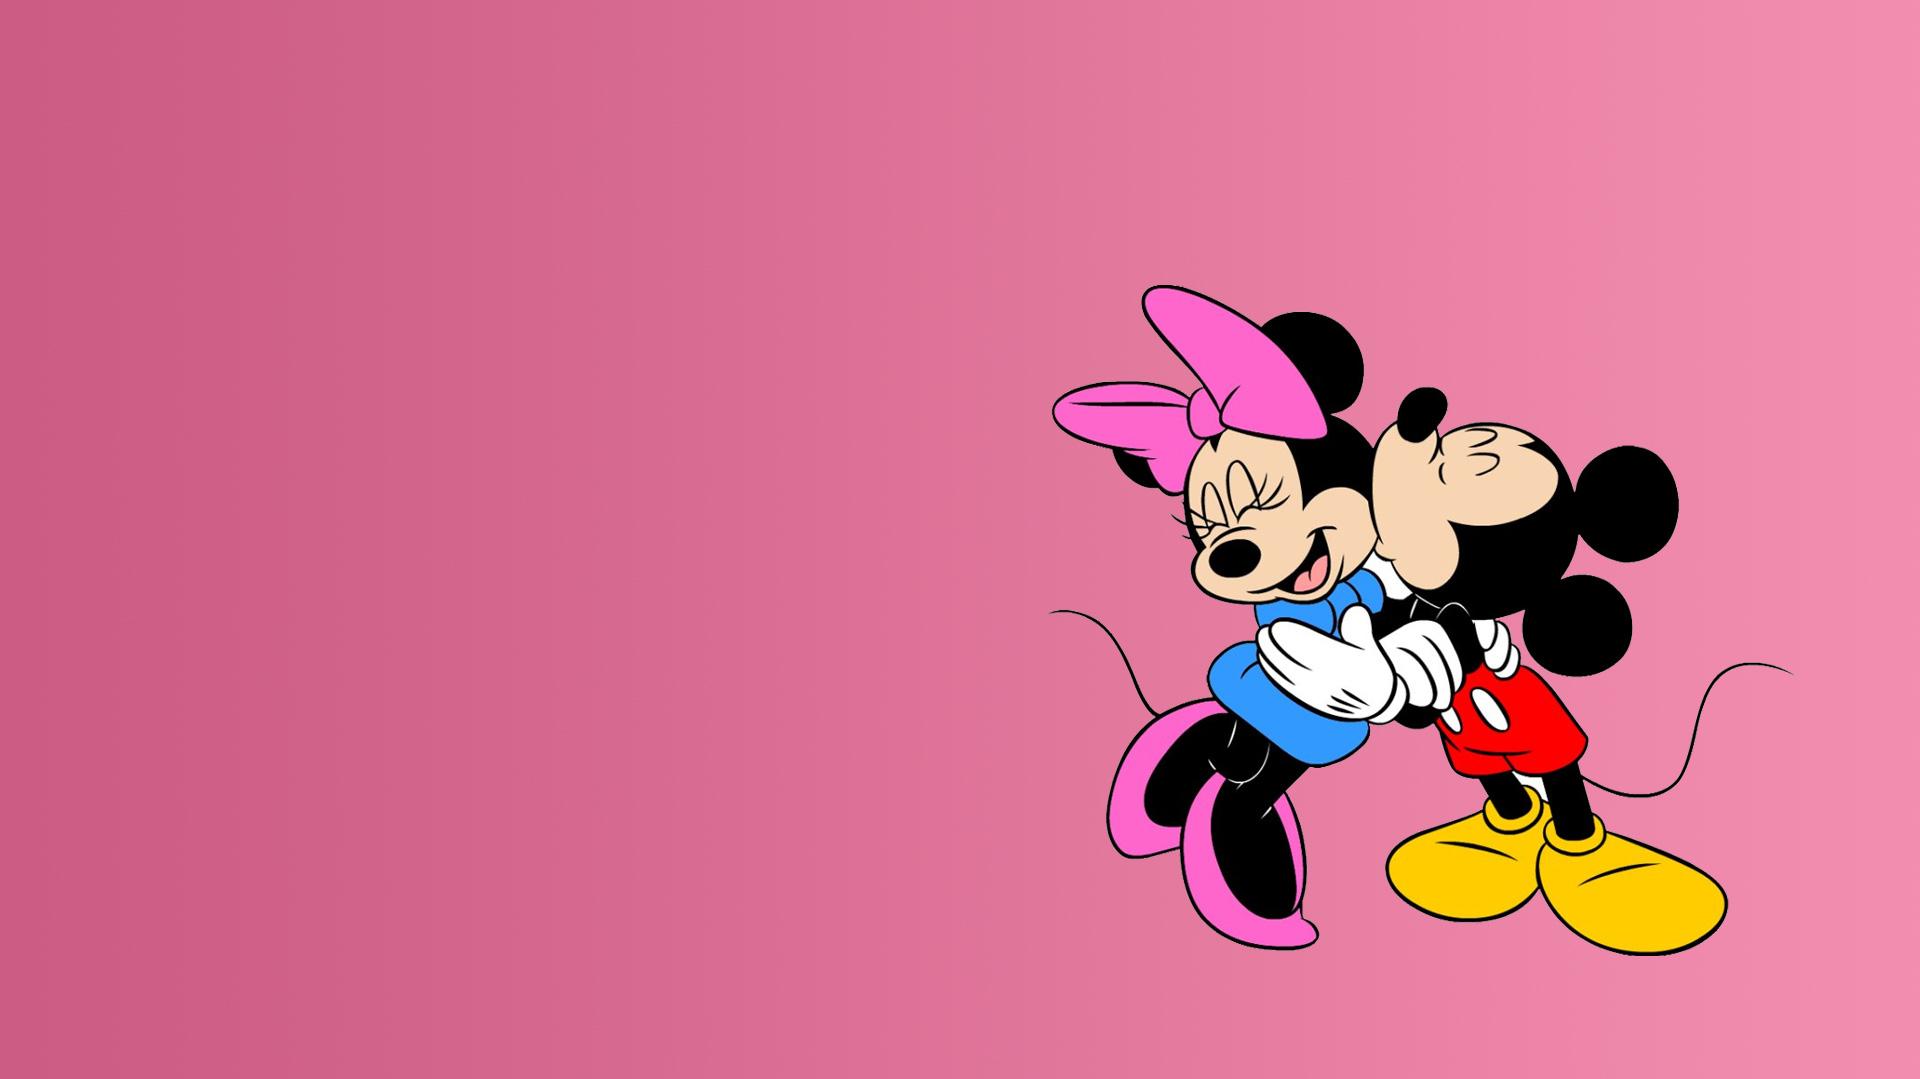 Free download Pin Minnie Mouse Hd Wallpaper Daisy Duck 300x187